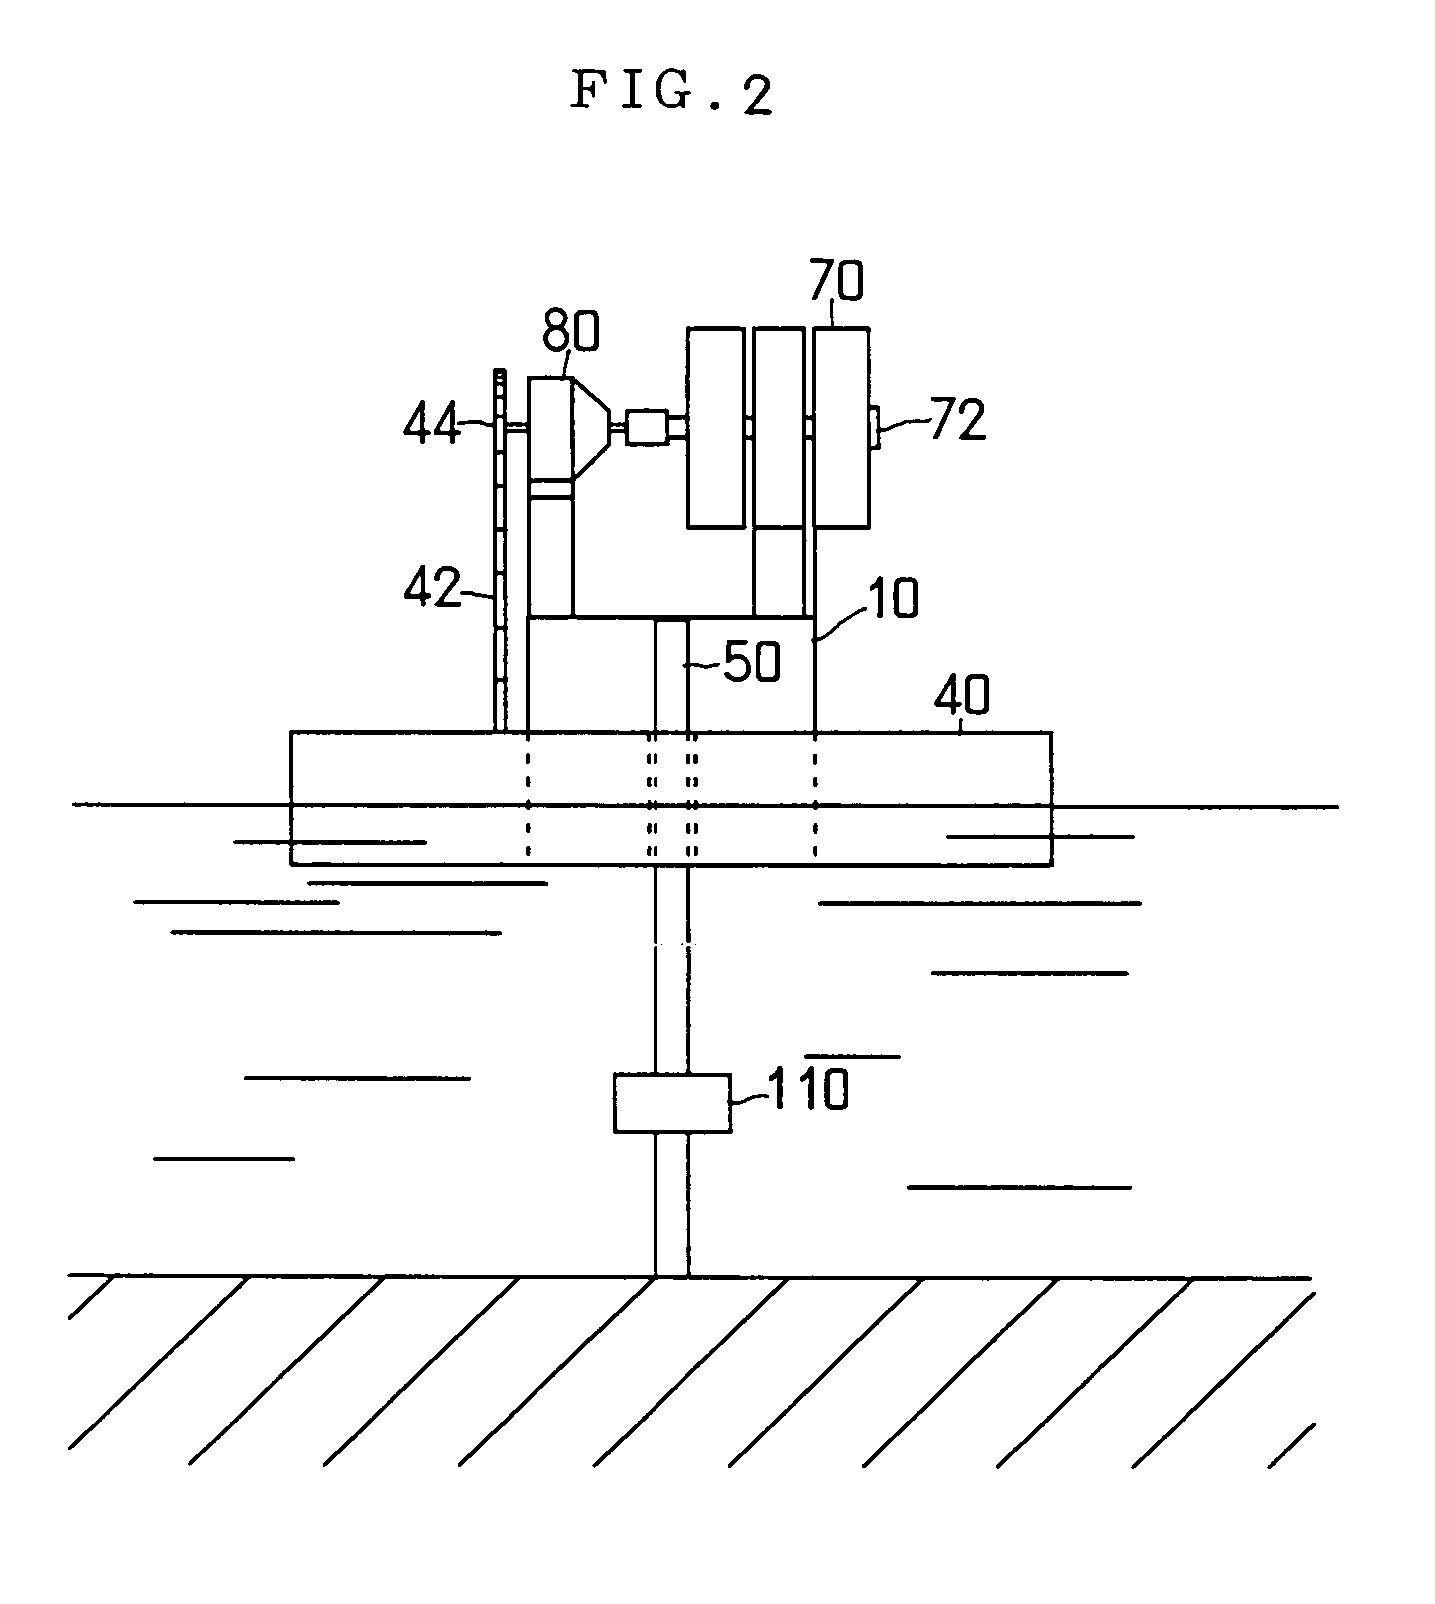 Power generation device utilizing river flow or seawater